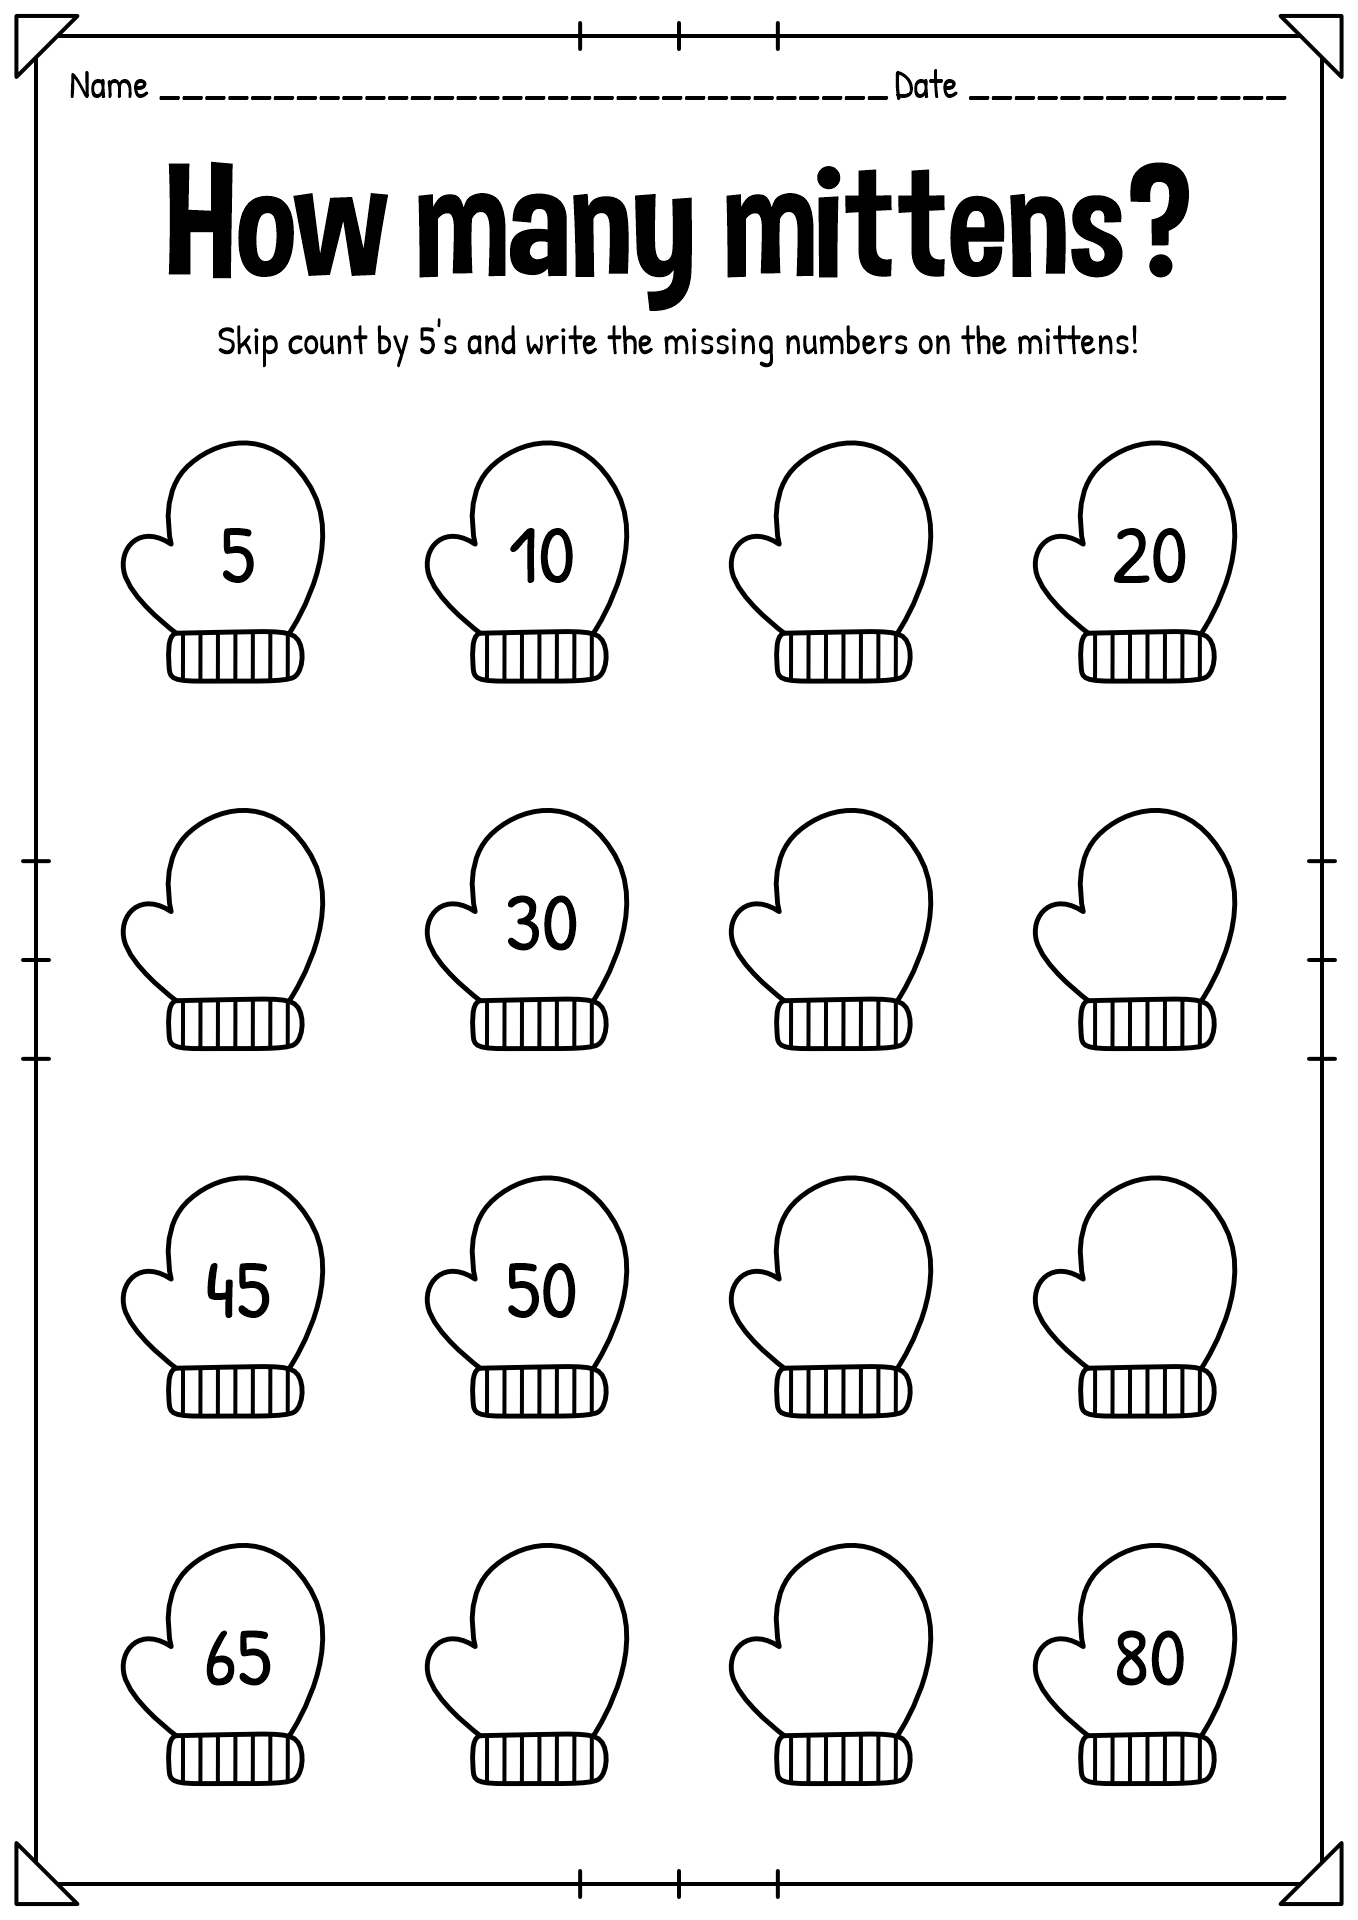 Counting Mittens Worksheet